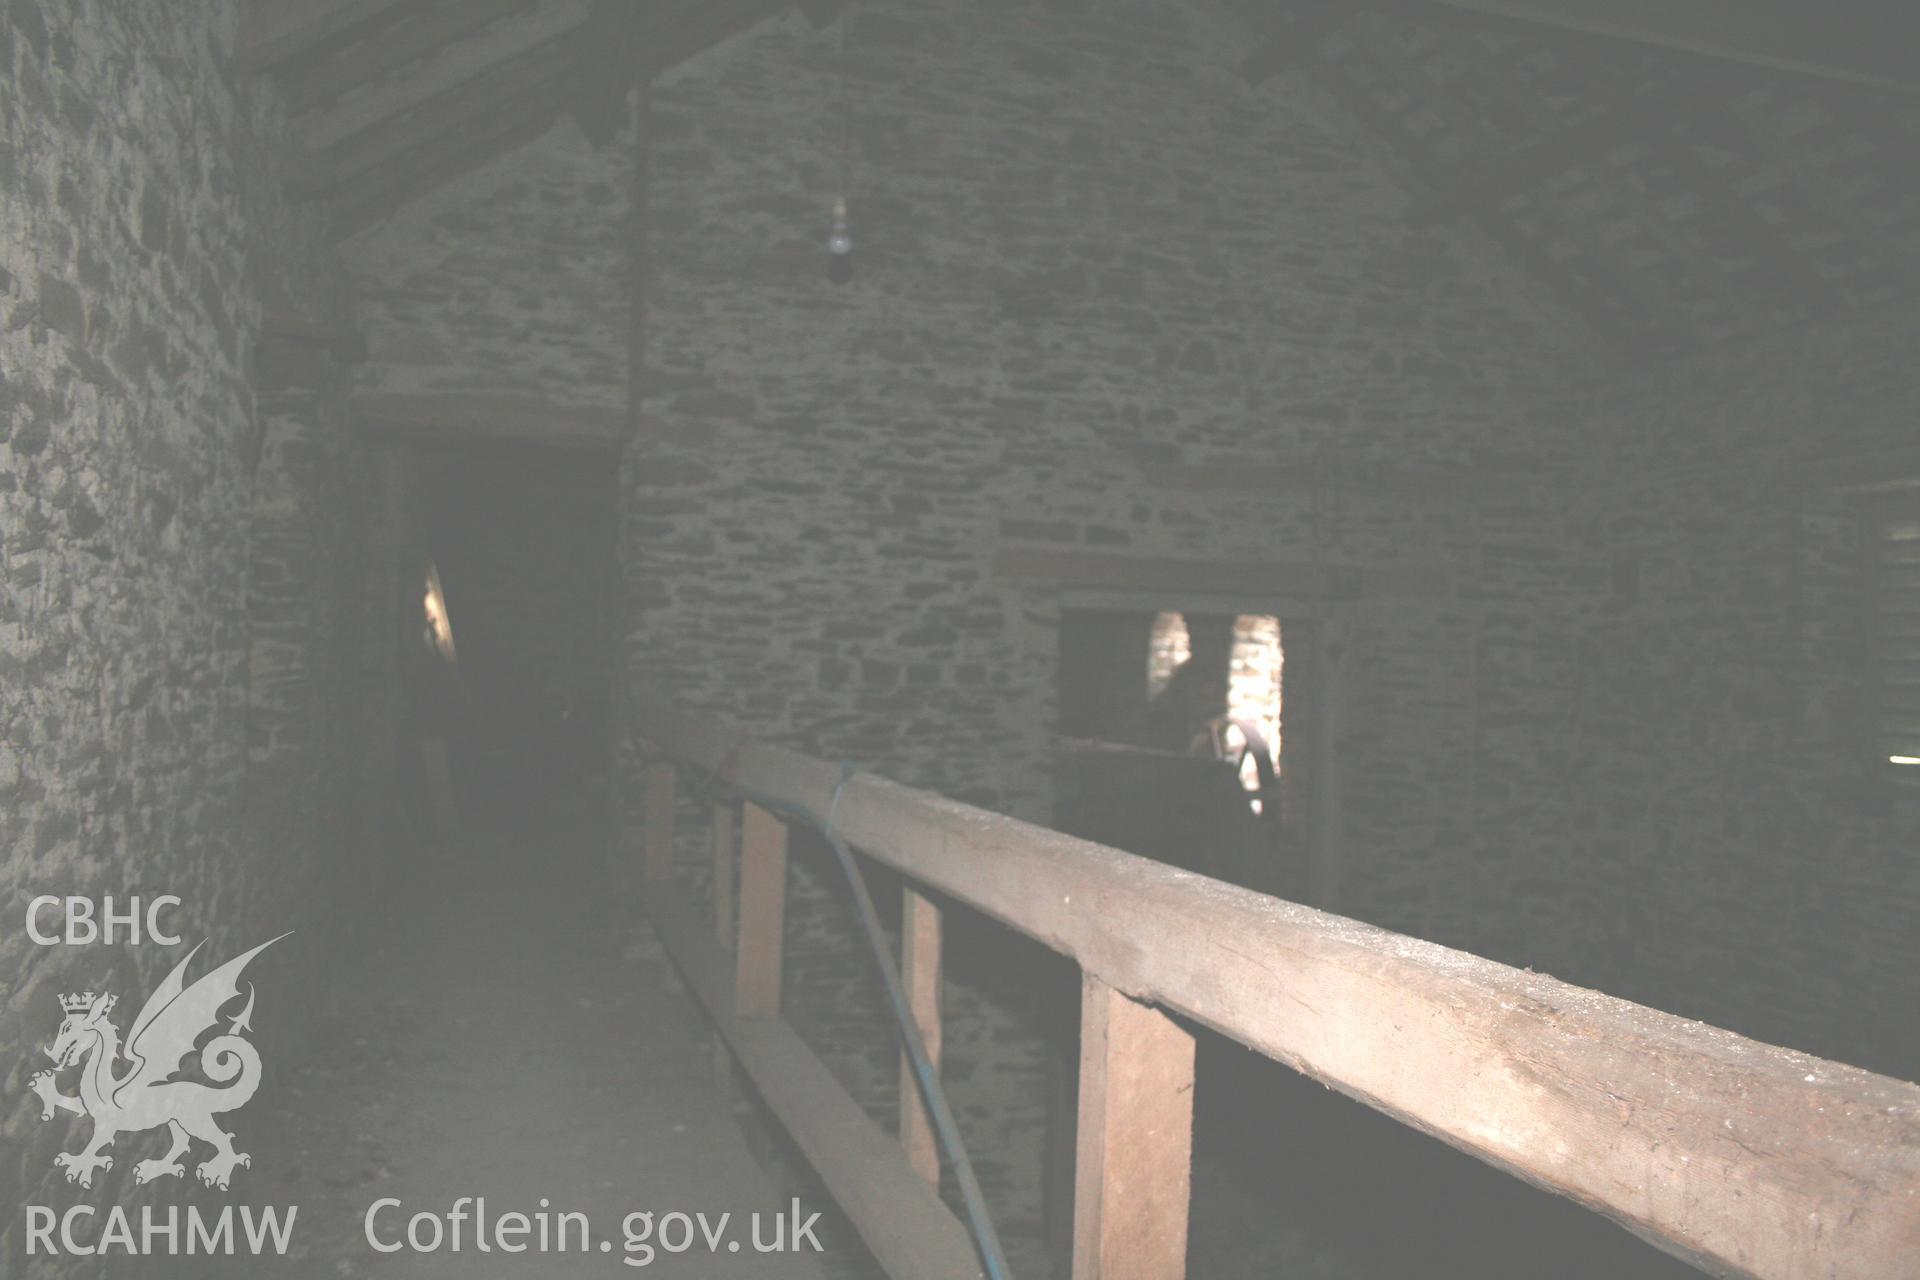 Interior view of gallery running along straw house. Photographic survey of the threshing house, straw house, mixing house and root house at Tan-y-Graig Farm, Llanfarian, conducted by Geoff Ward and John Wiles, 11th December 2006.